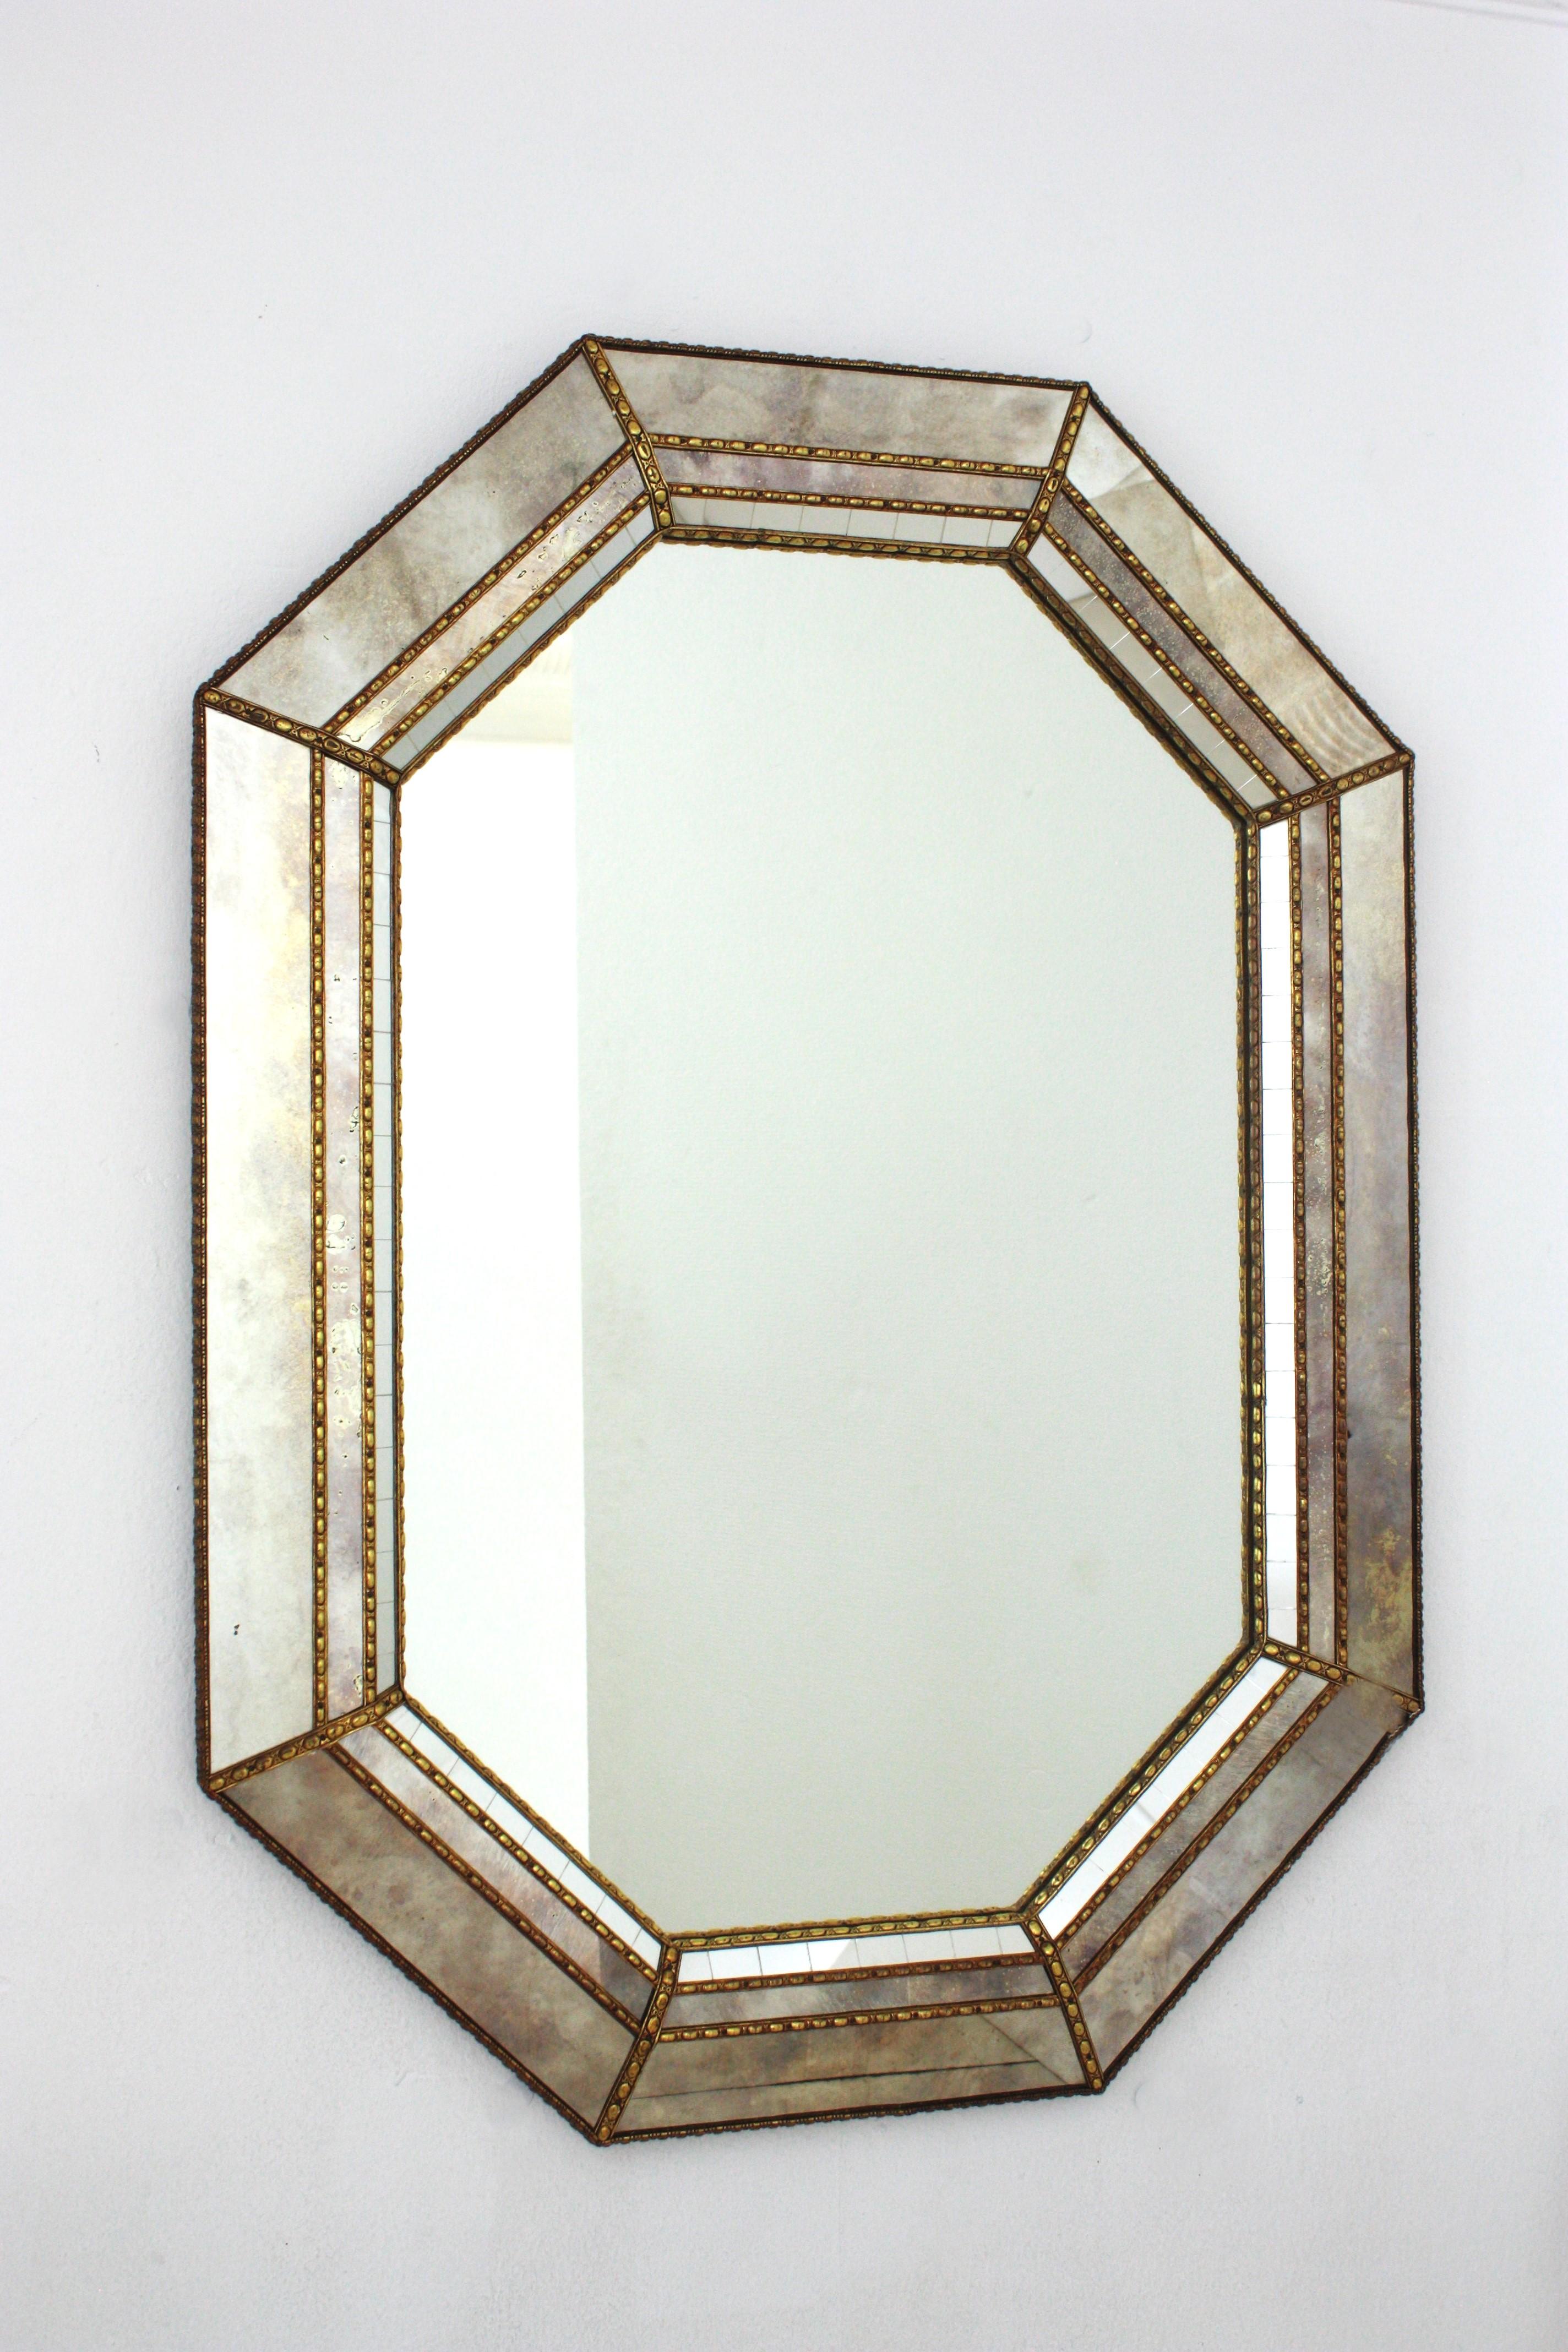 Elegant Venetian style Hollywood Regency octagonal mirror with iridiscent and mirror glass panels. Spain, 1960s
This glamorous mirror featuring a triple layered mirror frame made of brass. Octagon form with a frame that has three layers of